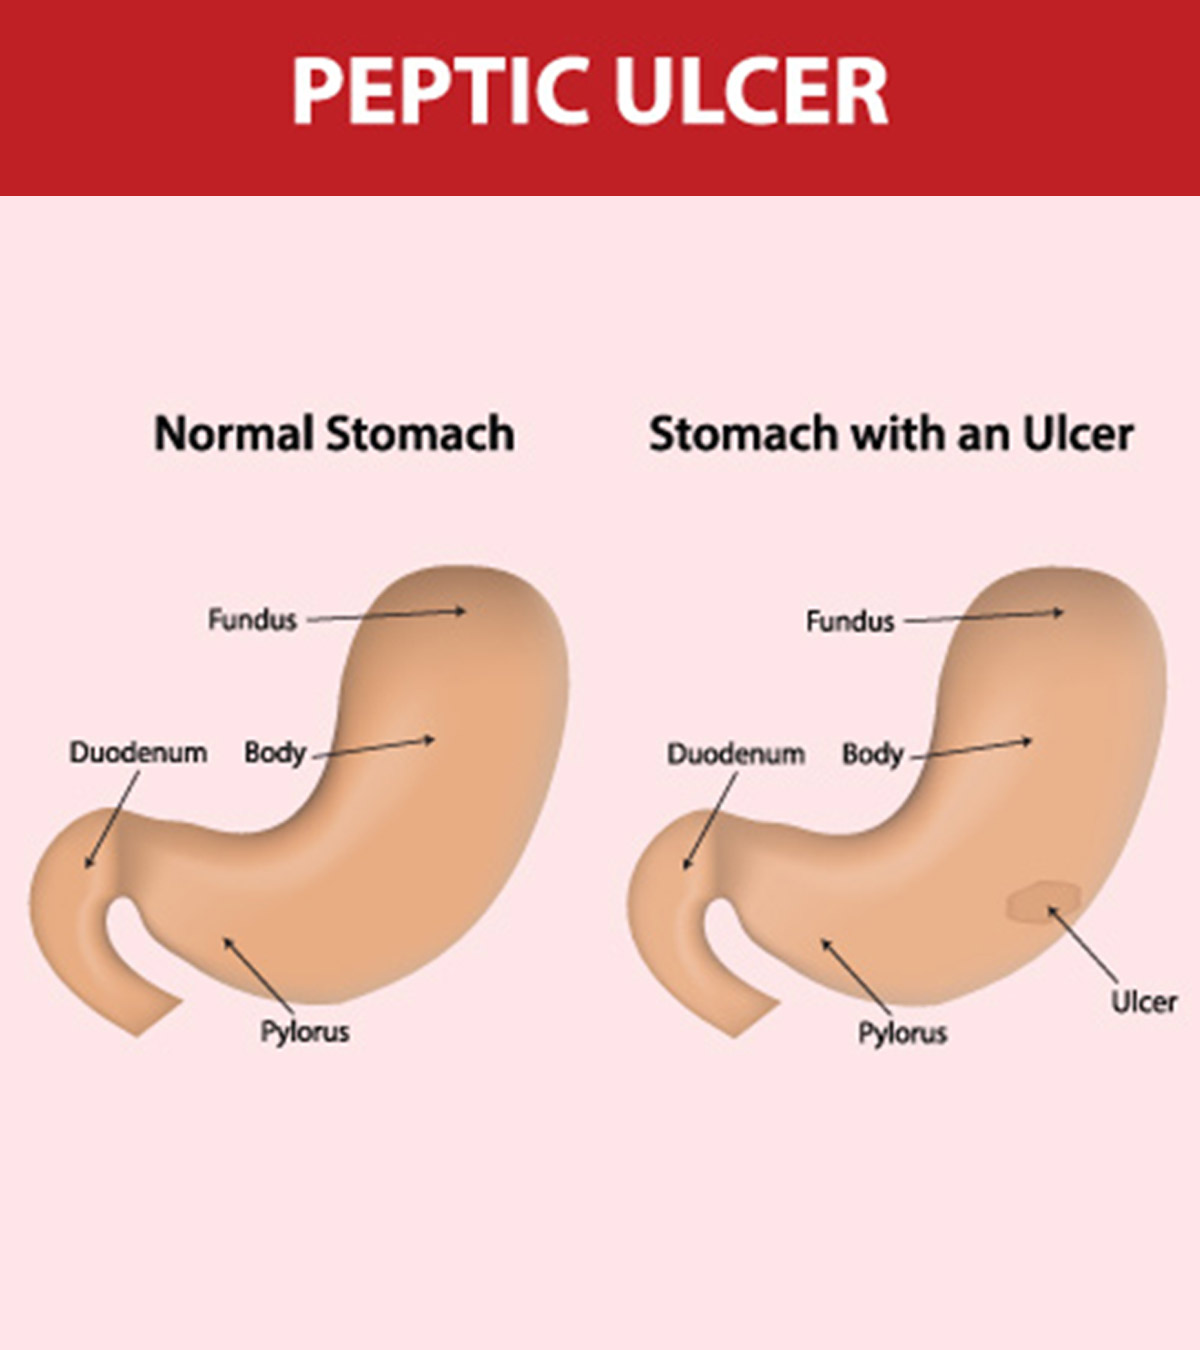 7 Symptoms Of Stomach Ulcer In Children: Causes & Treatment